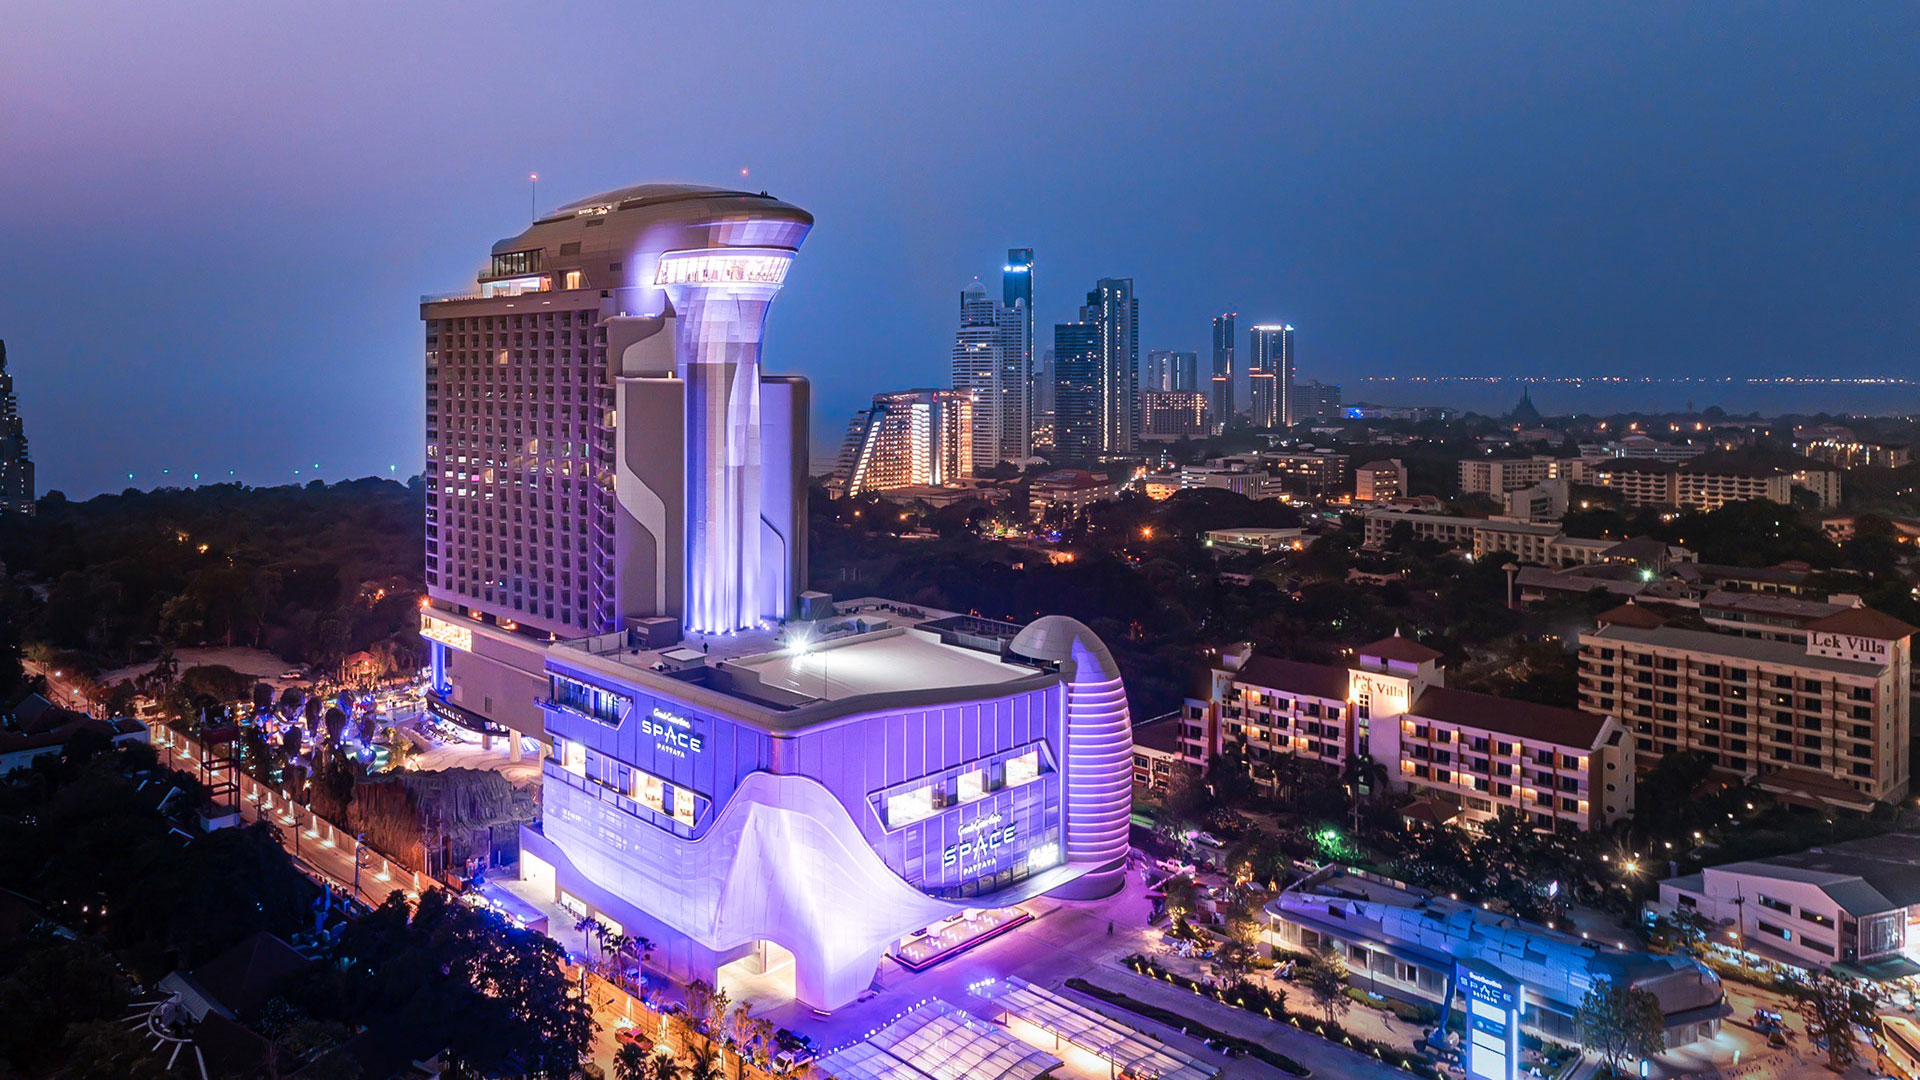 Hotels of the world: a space-themed hotel, Thailand